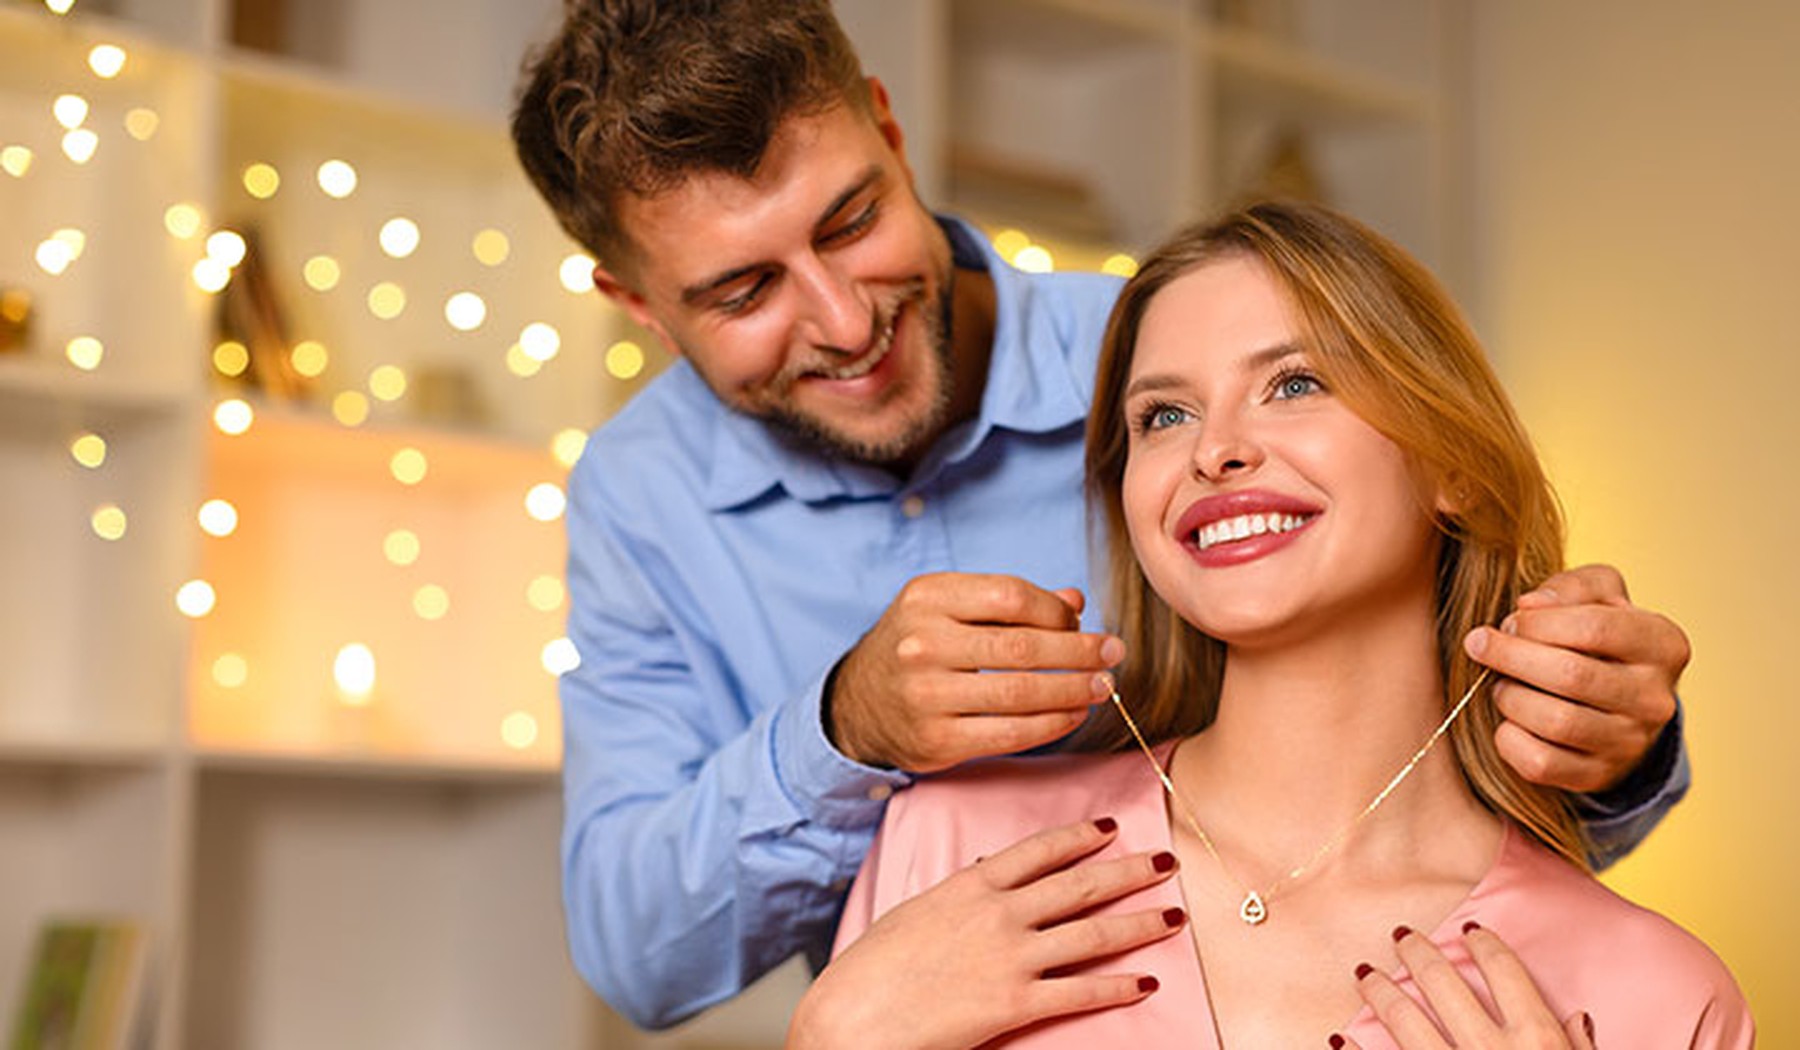 Man putting heart necklace on smiling woman